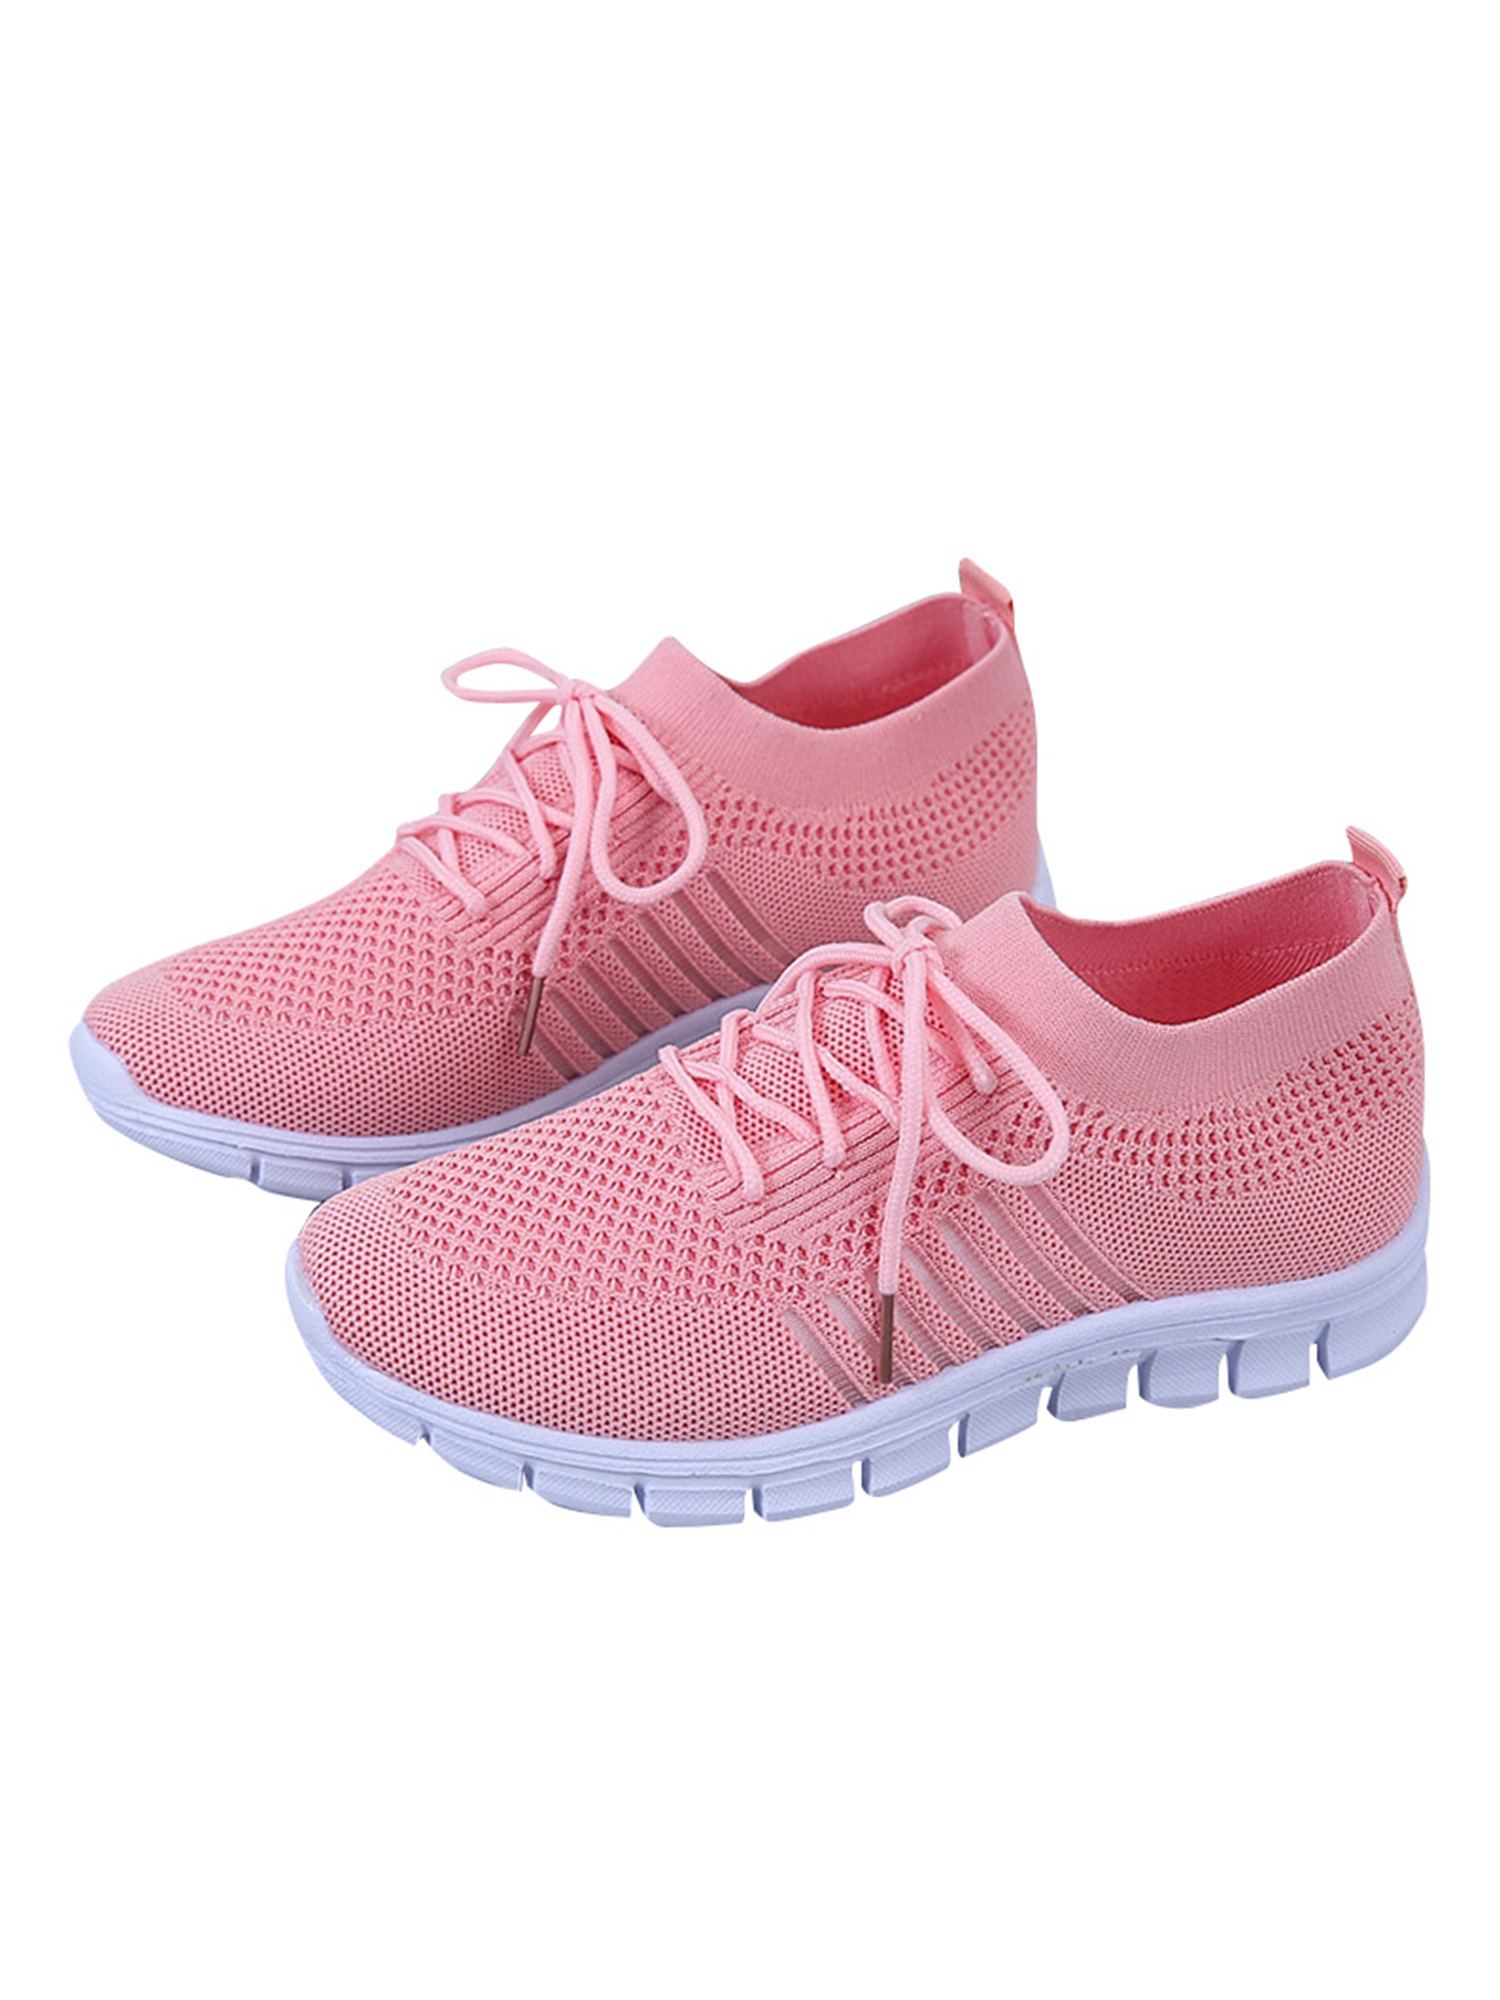 Details about  / Womens Sneakers Walking Running Breathable Athletic Sports Tennis Casual Shoes